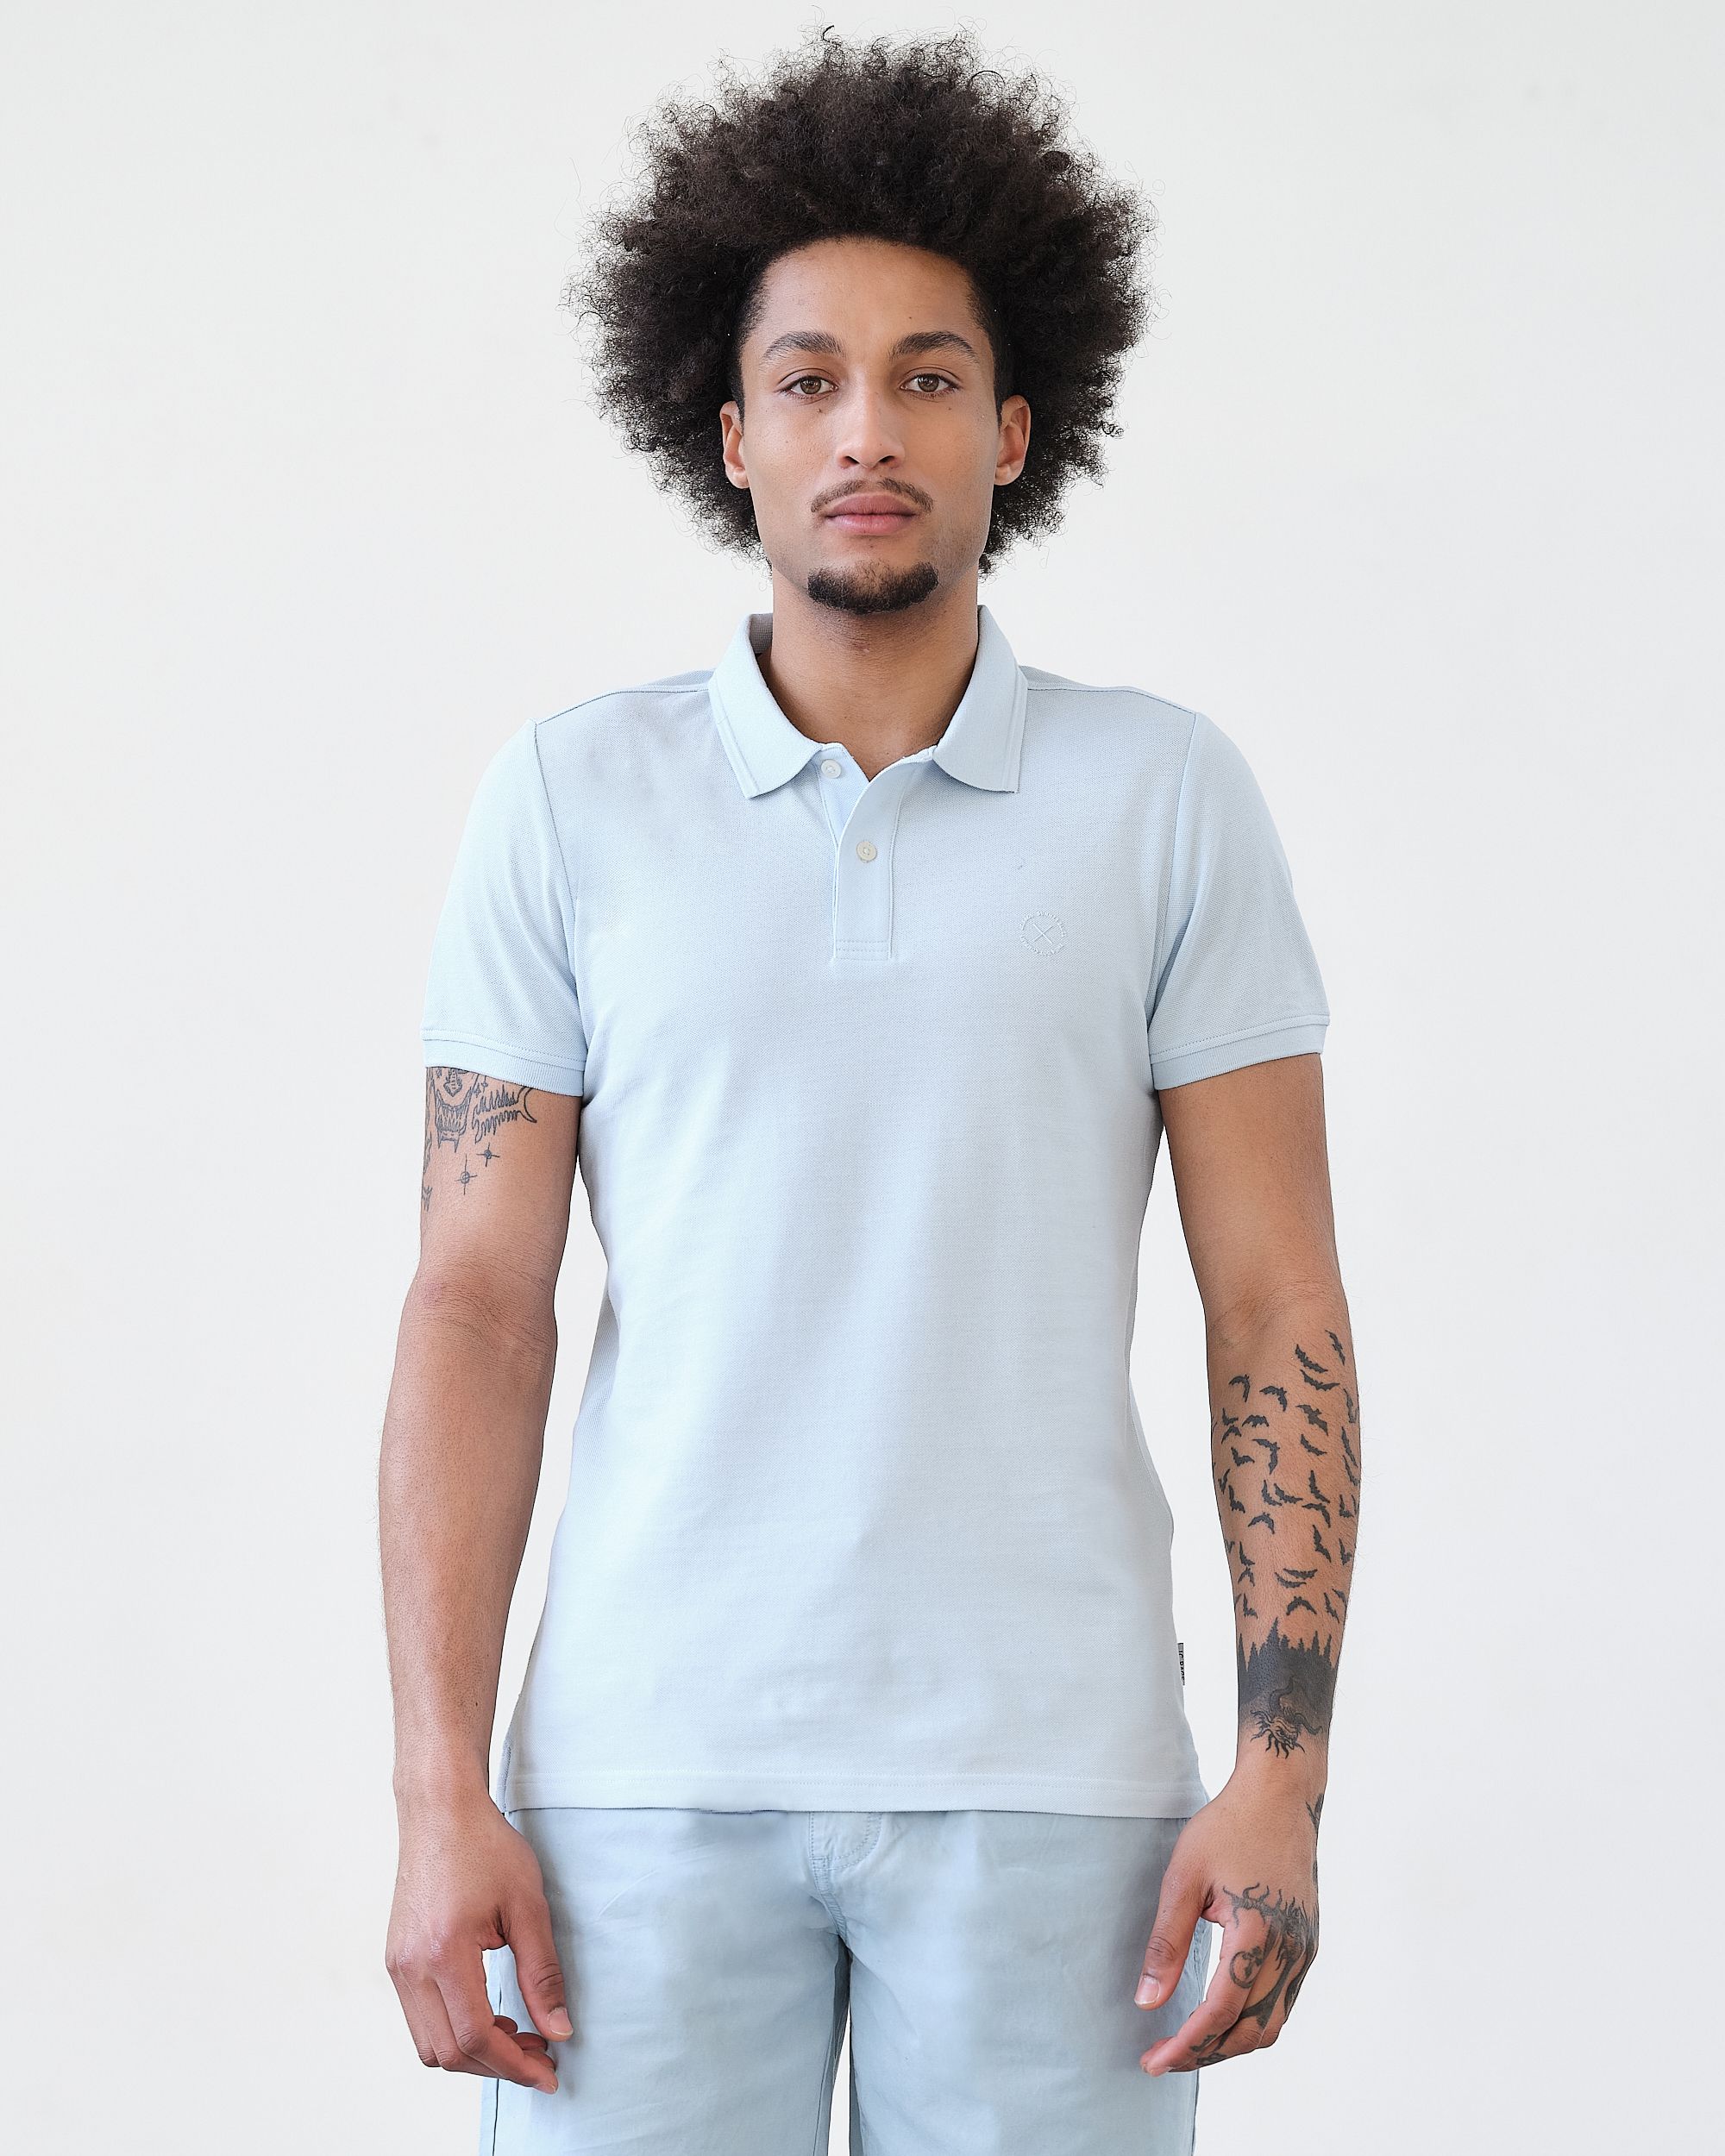 J.C. RAGS Carter Polo KM Omphalodes 073954-011-L